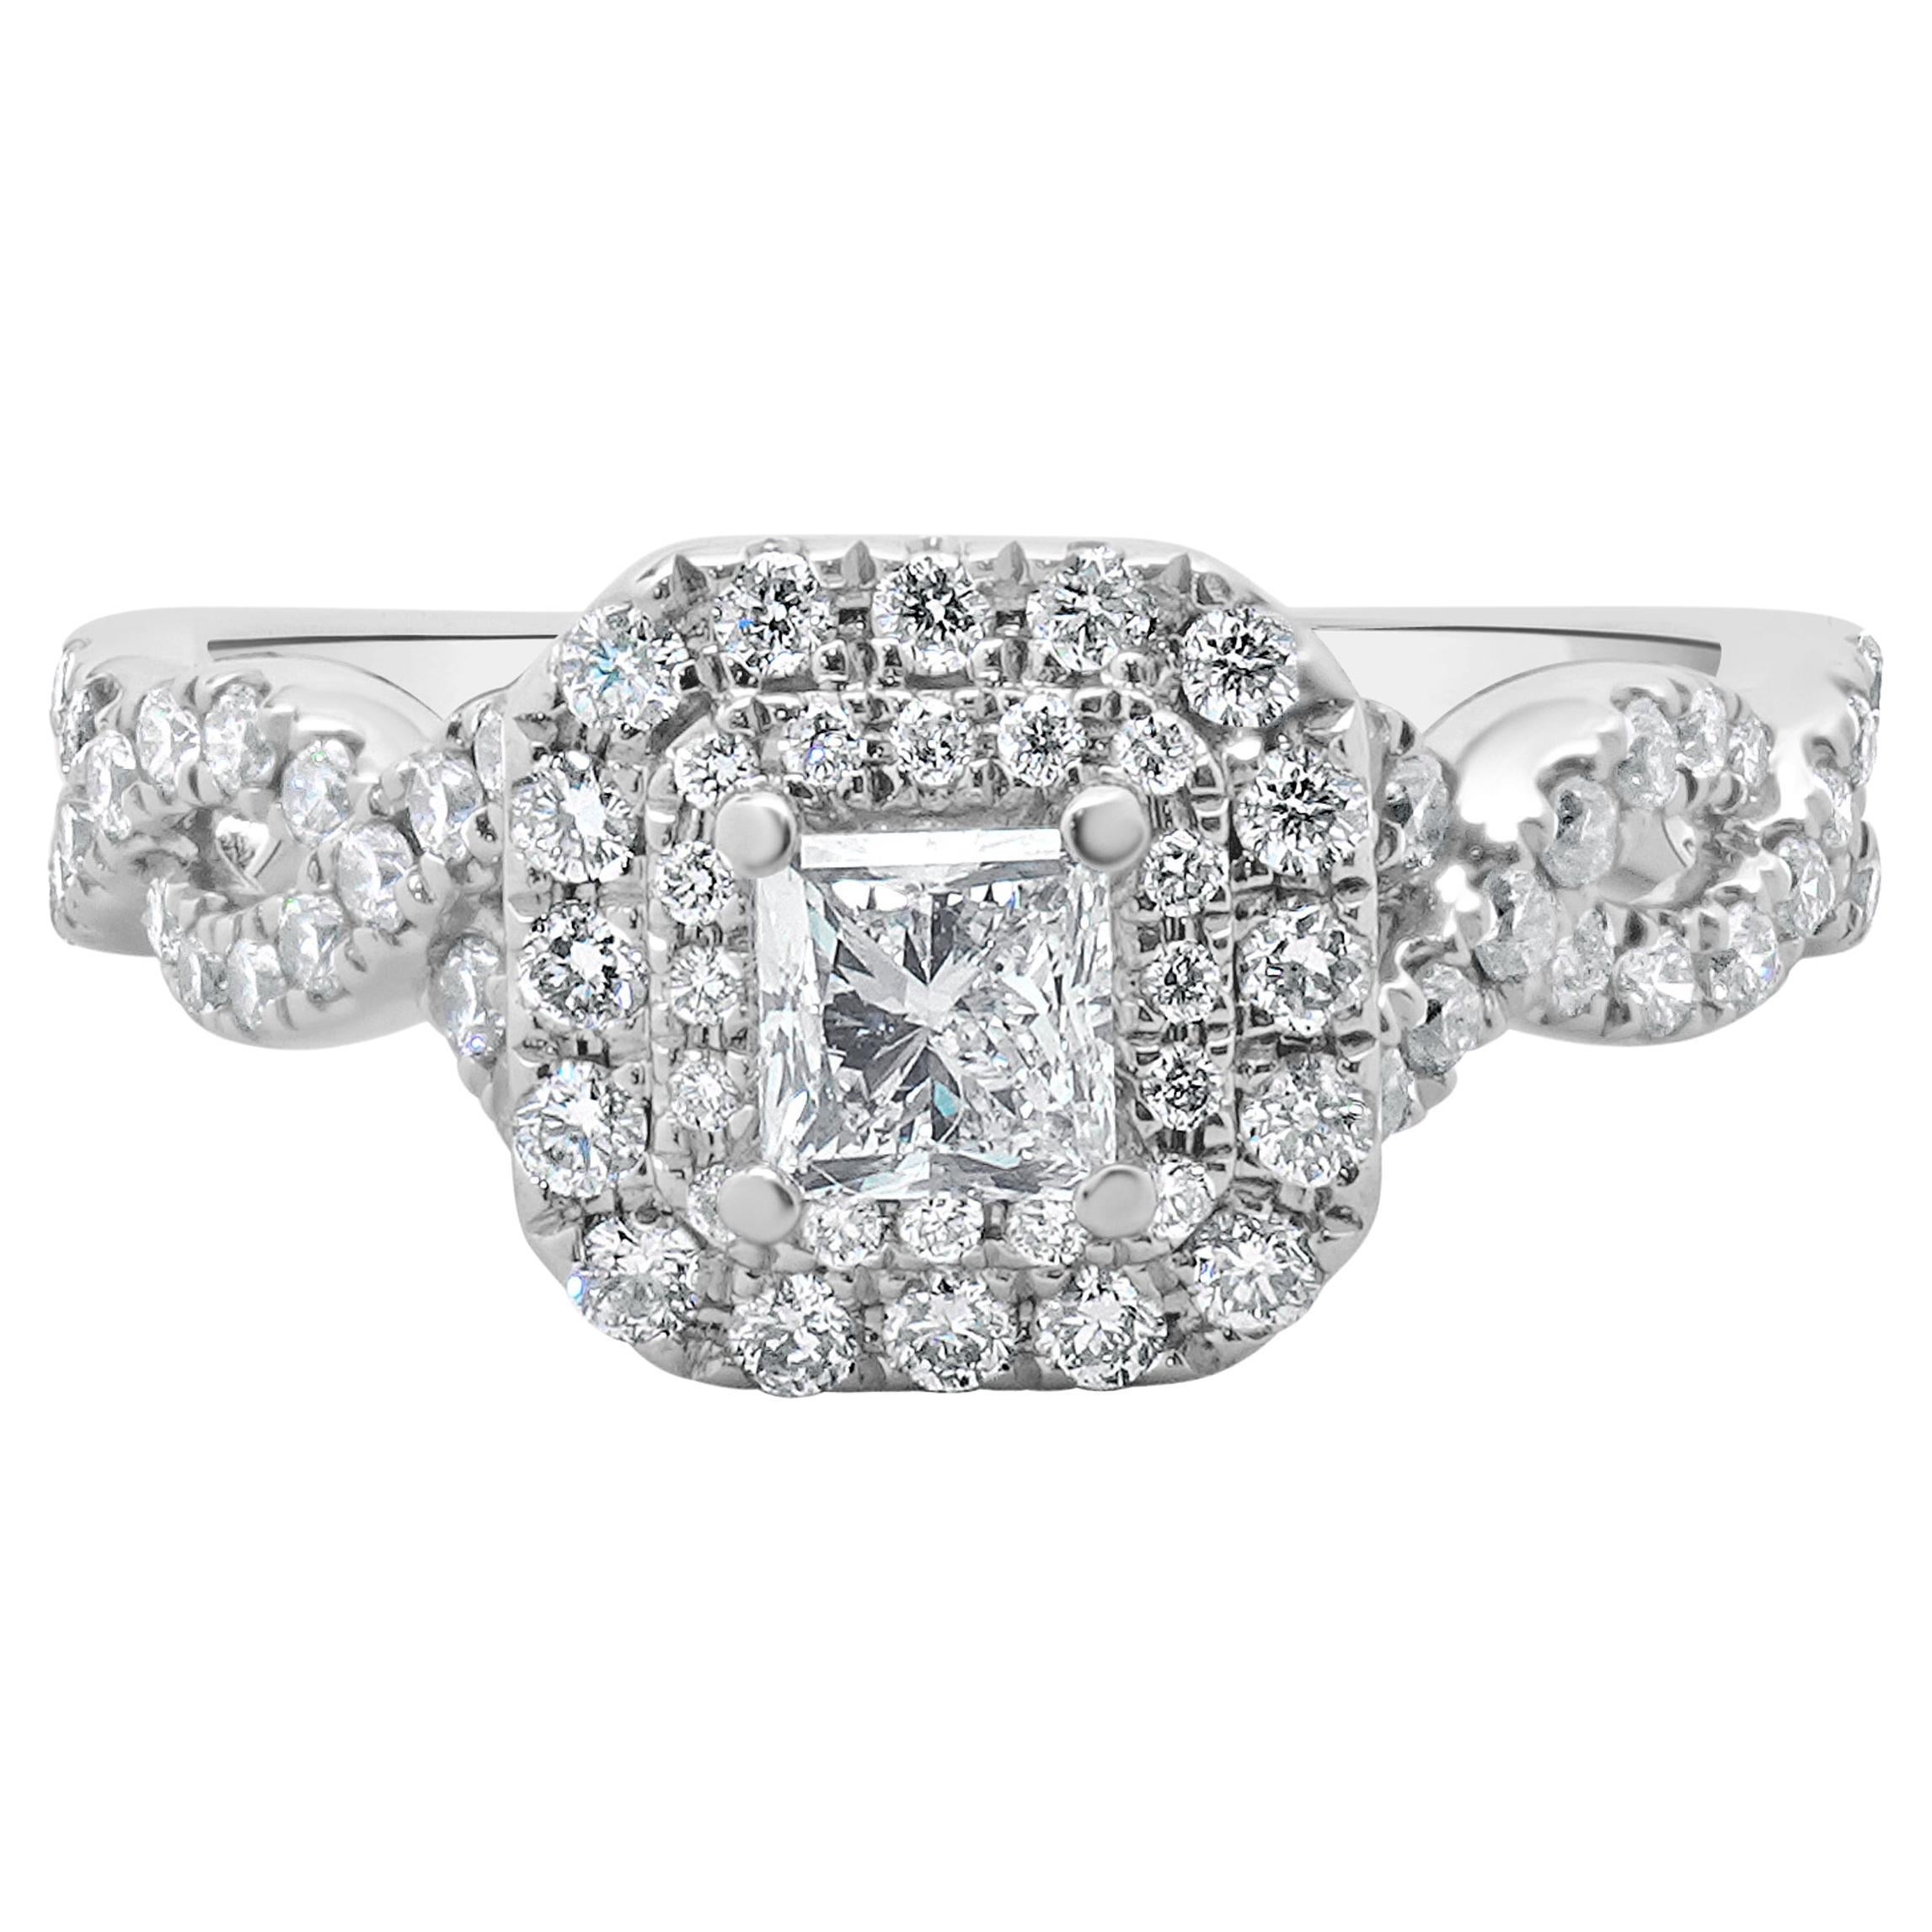 Are Vera Wang engagement rings certified?